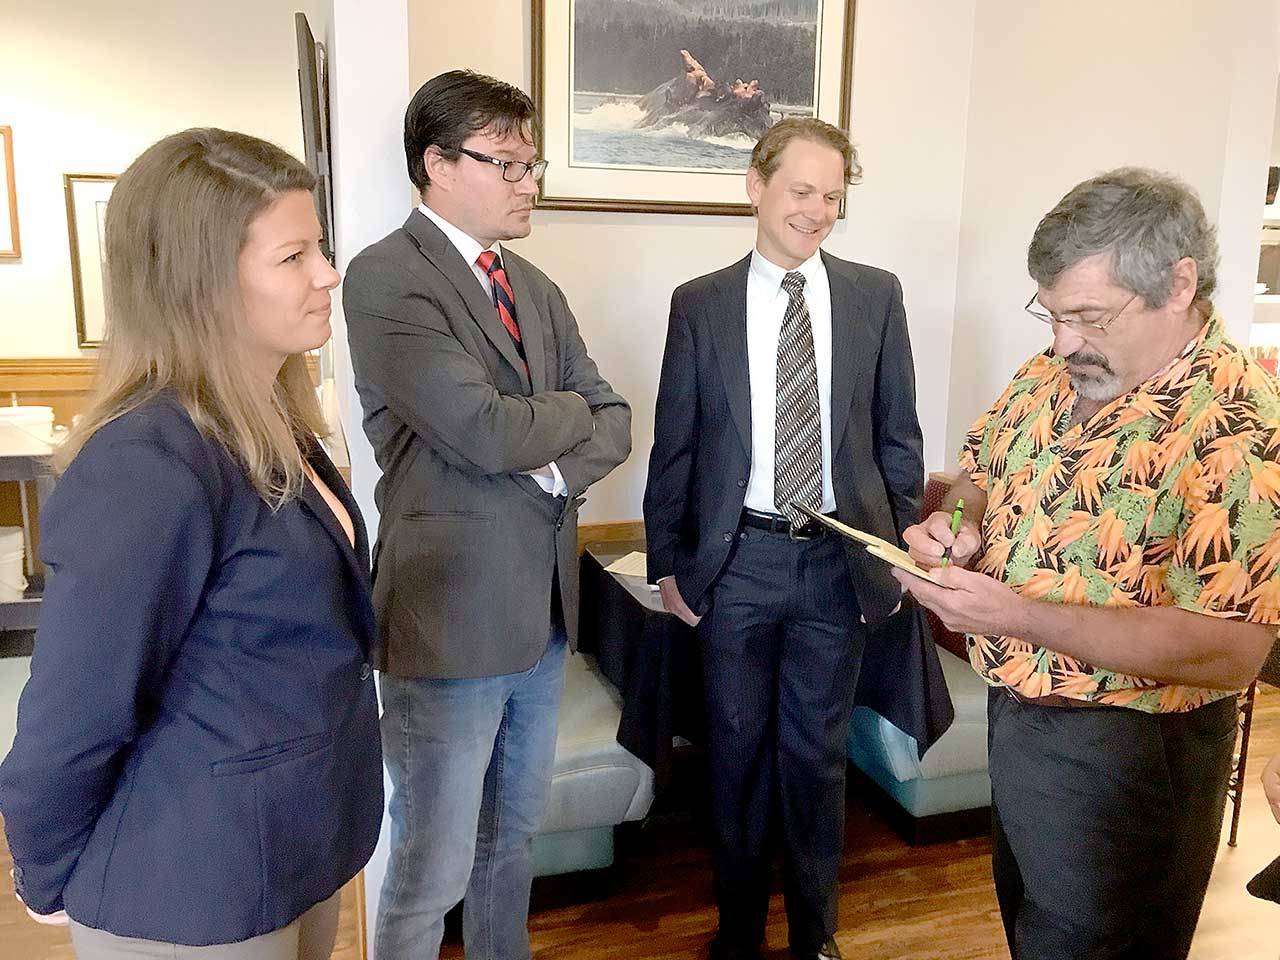 Left to right, Port Angeles City Council candidates Jena Stamper, Jason Thompson and Lindsey Schromen-Wawrin receive election forum format information from moderator Andrew May. (Paul Gottlieb/Peninsula Daily News)